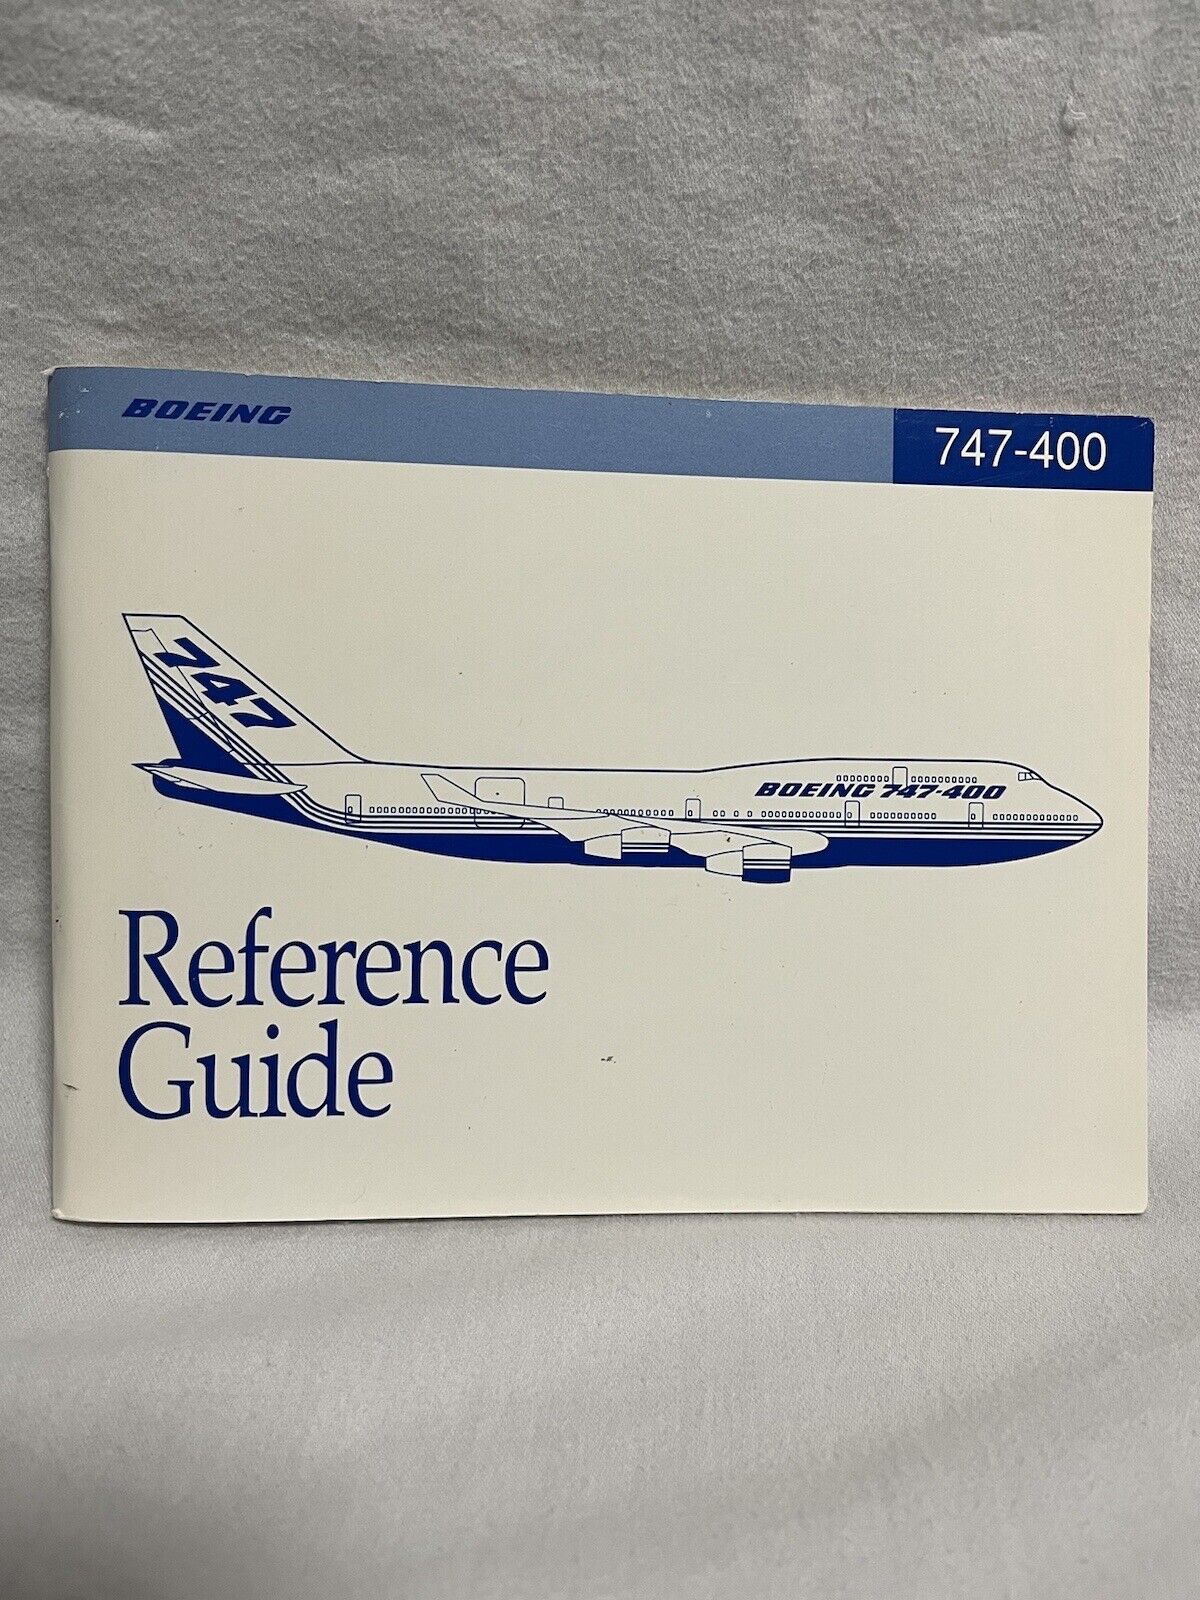 VTG Boeing 747-400 Reference Guide Booklet June 1992 Employee Training Airplane